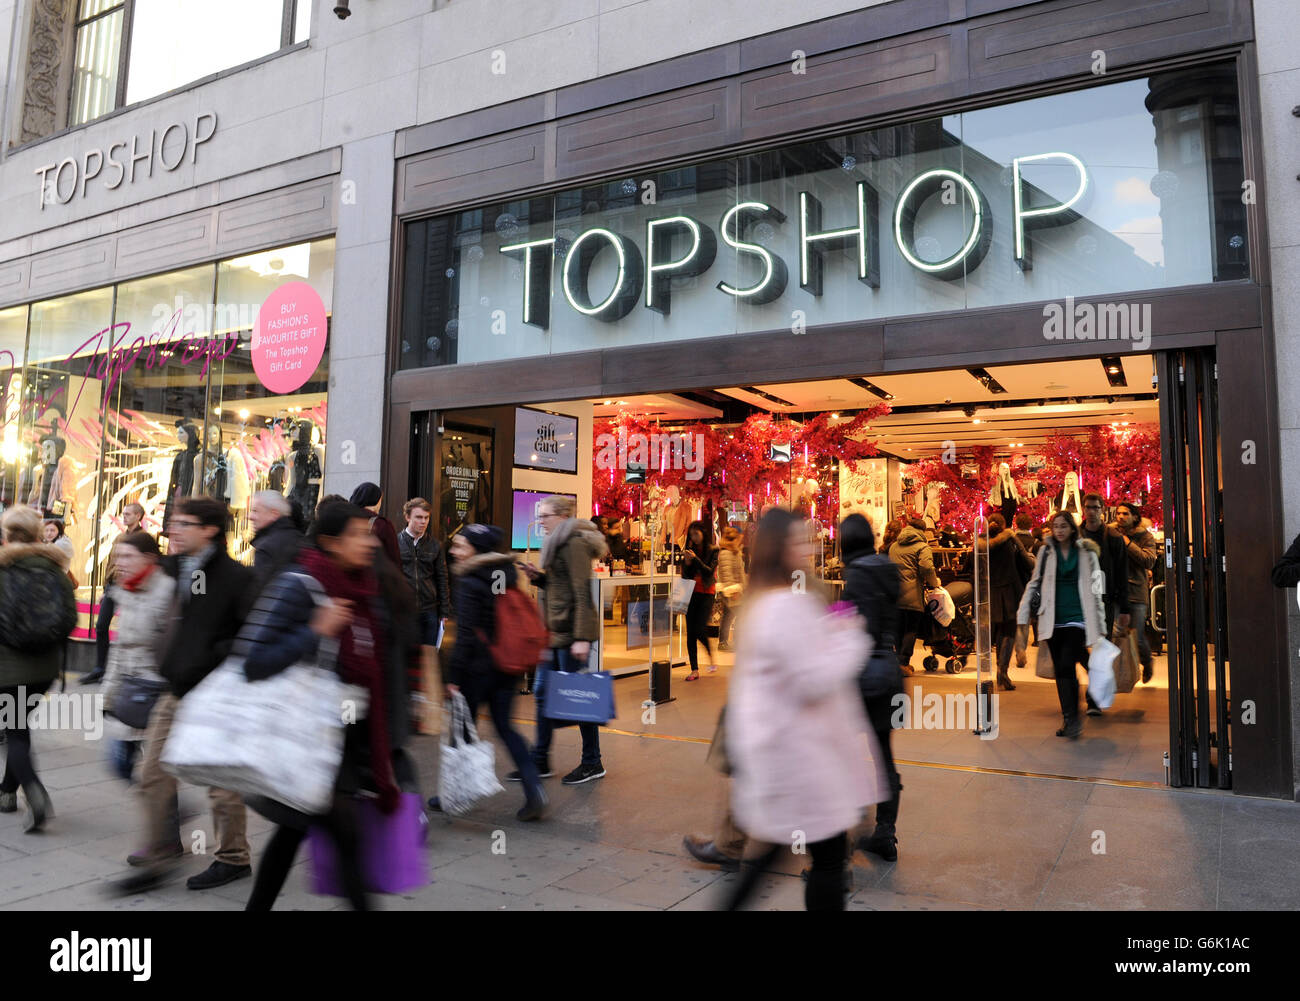 A Topshop retail store on Oxford Street, London. PRESS ASSOCIATION Photo. Picture Date: Thursday 14 November 2013 Photo credit should read: Tim Goode/PA Wire Stock Photo